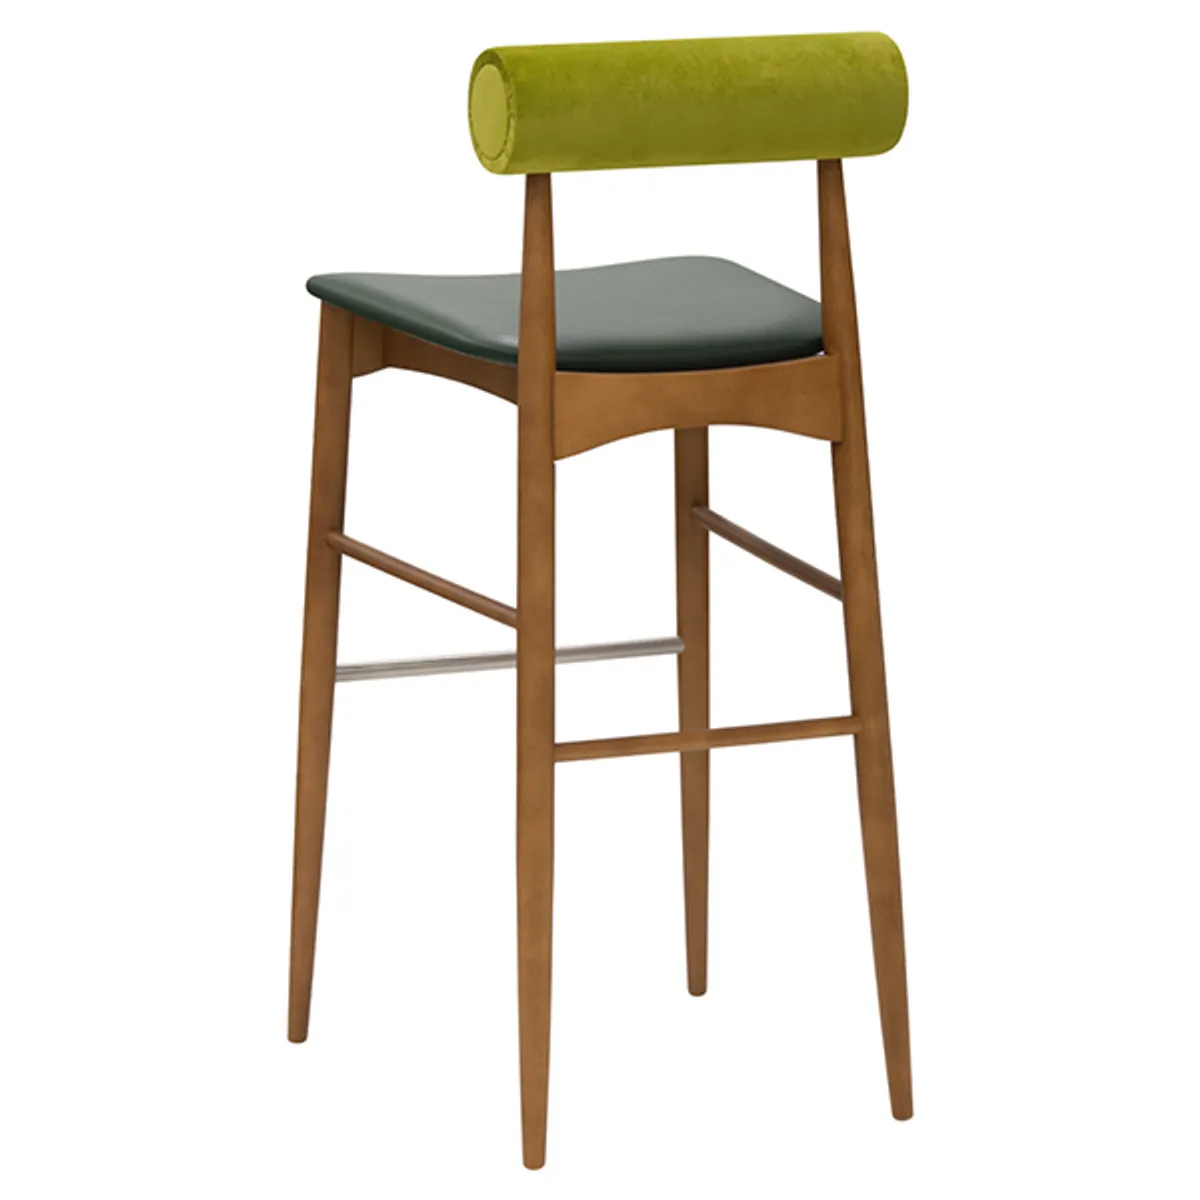 Rolla Bar Stool Quirky Furniture For Hospitality Inside Out Contracts 3